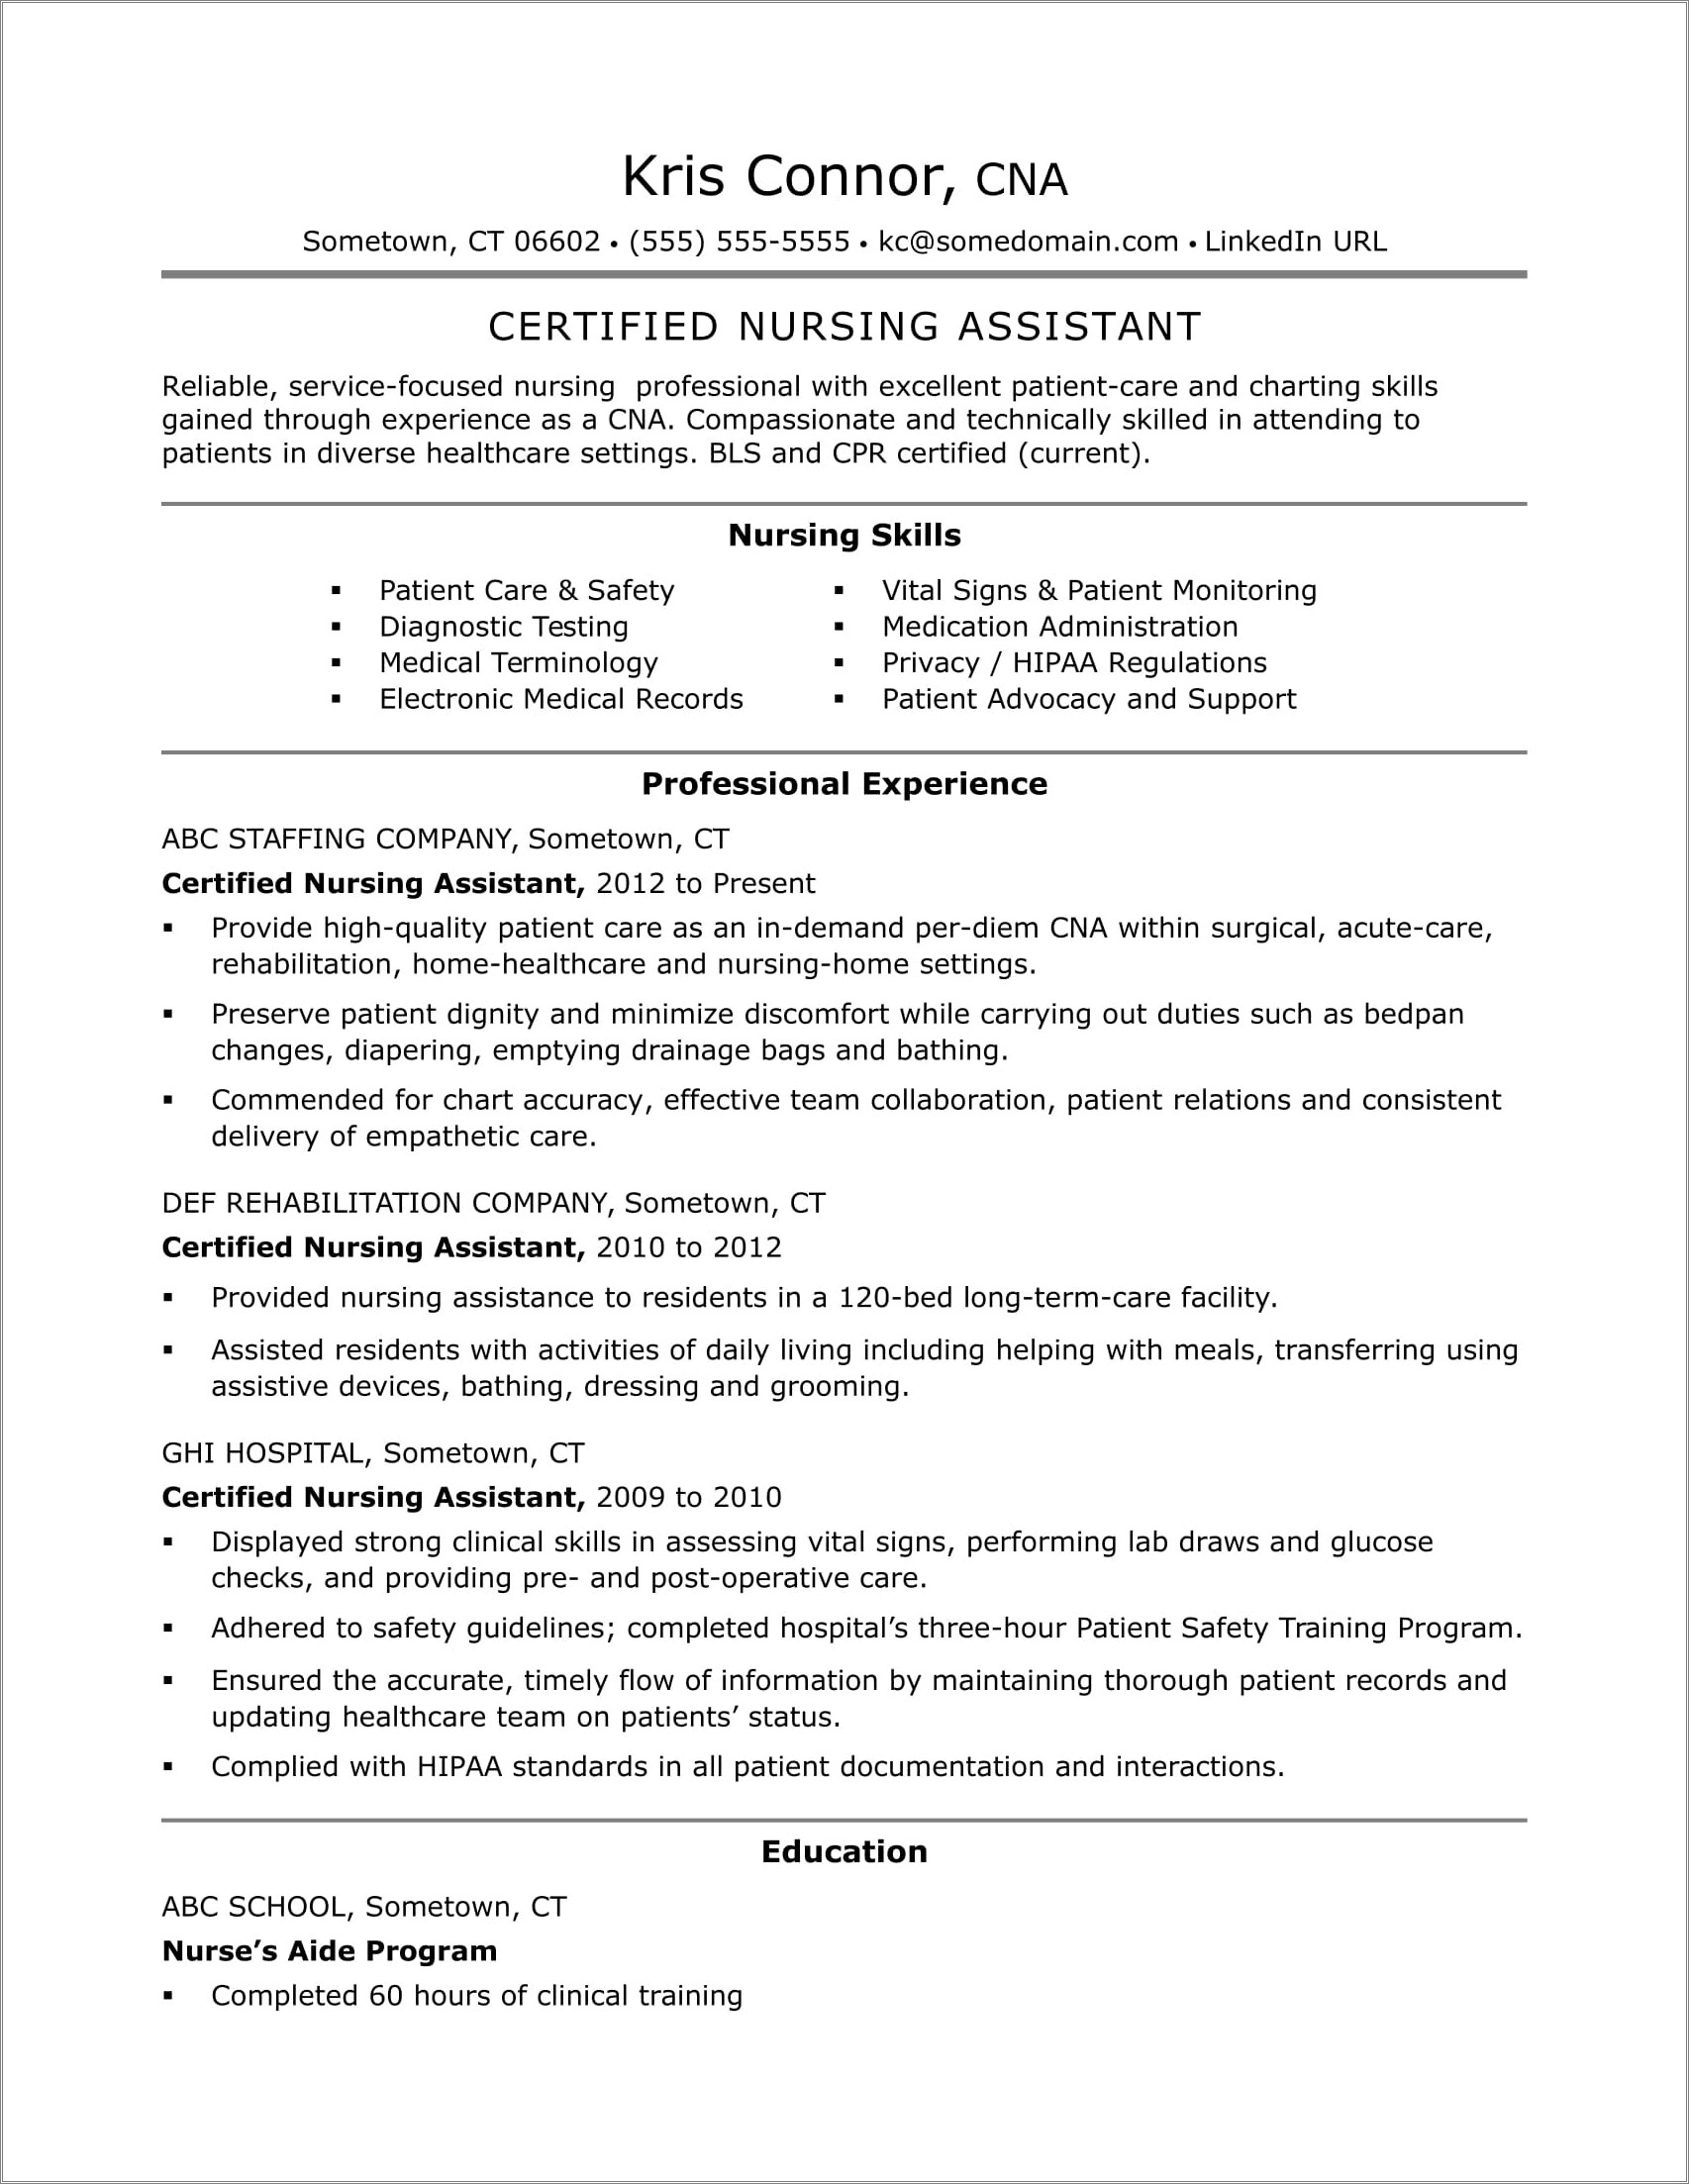 Free Examples Of Medical Assistant Resumes